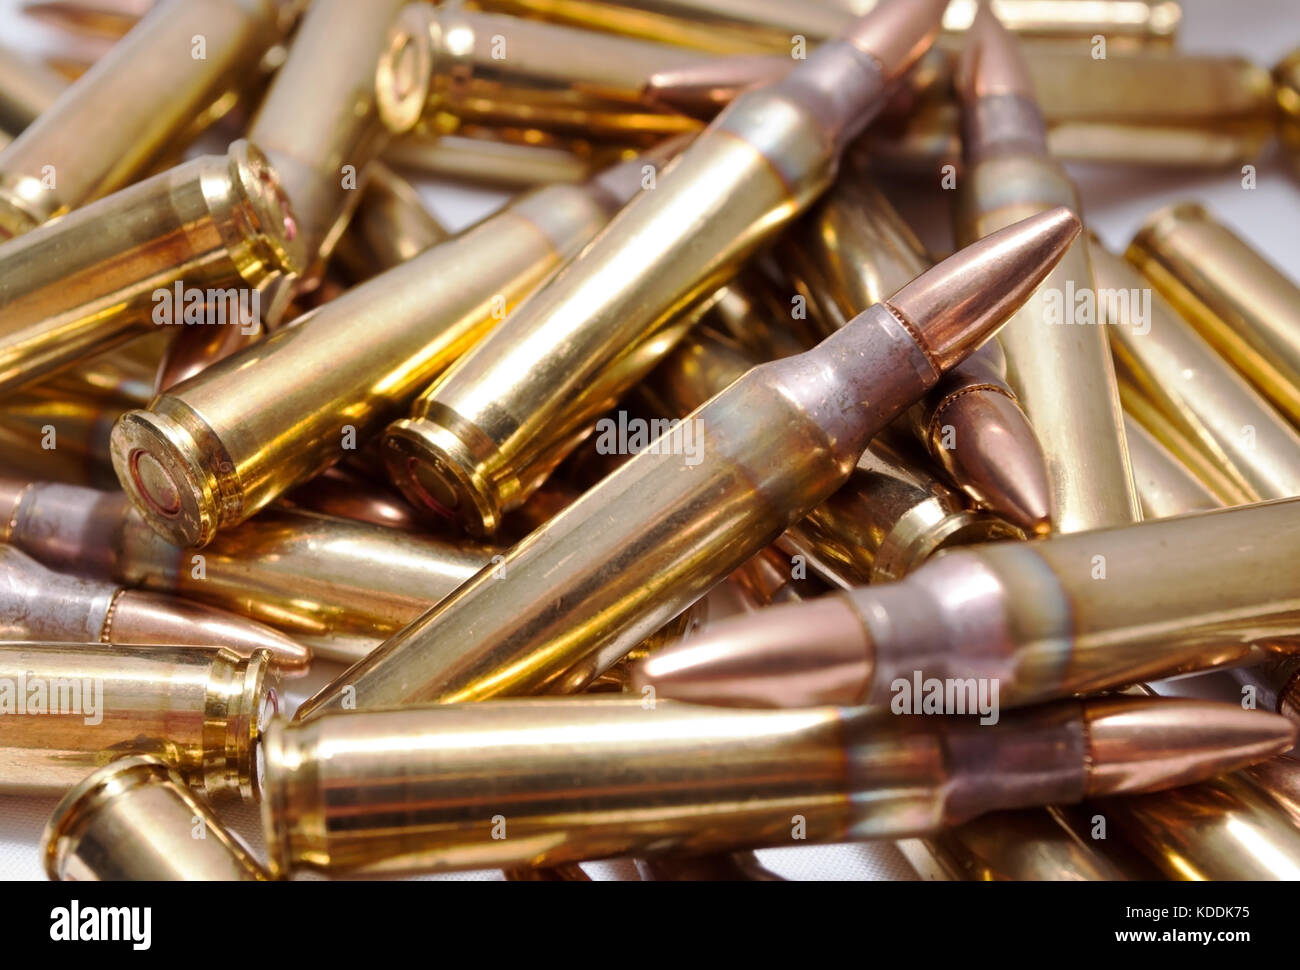 223 Rifle Bullets Shown Close Up In A Pile Stock Photo Alamy